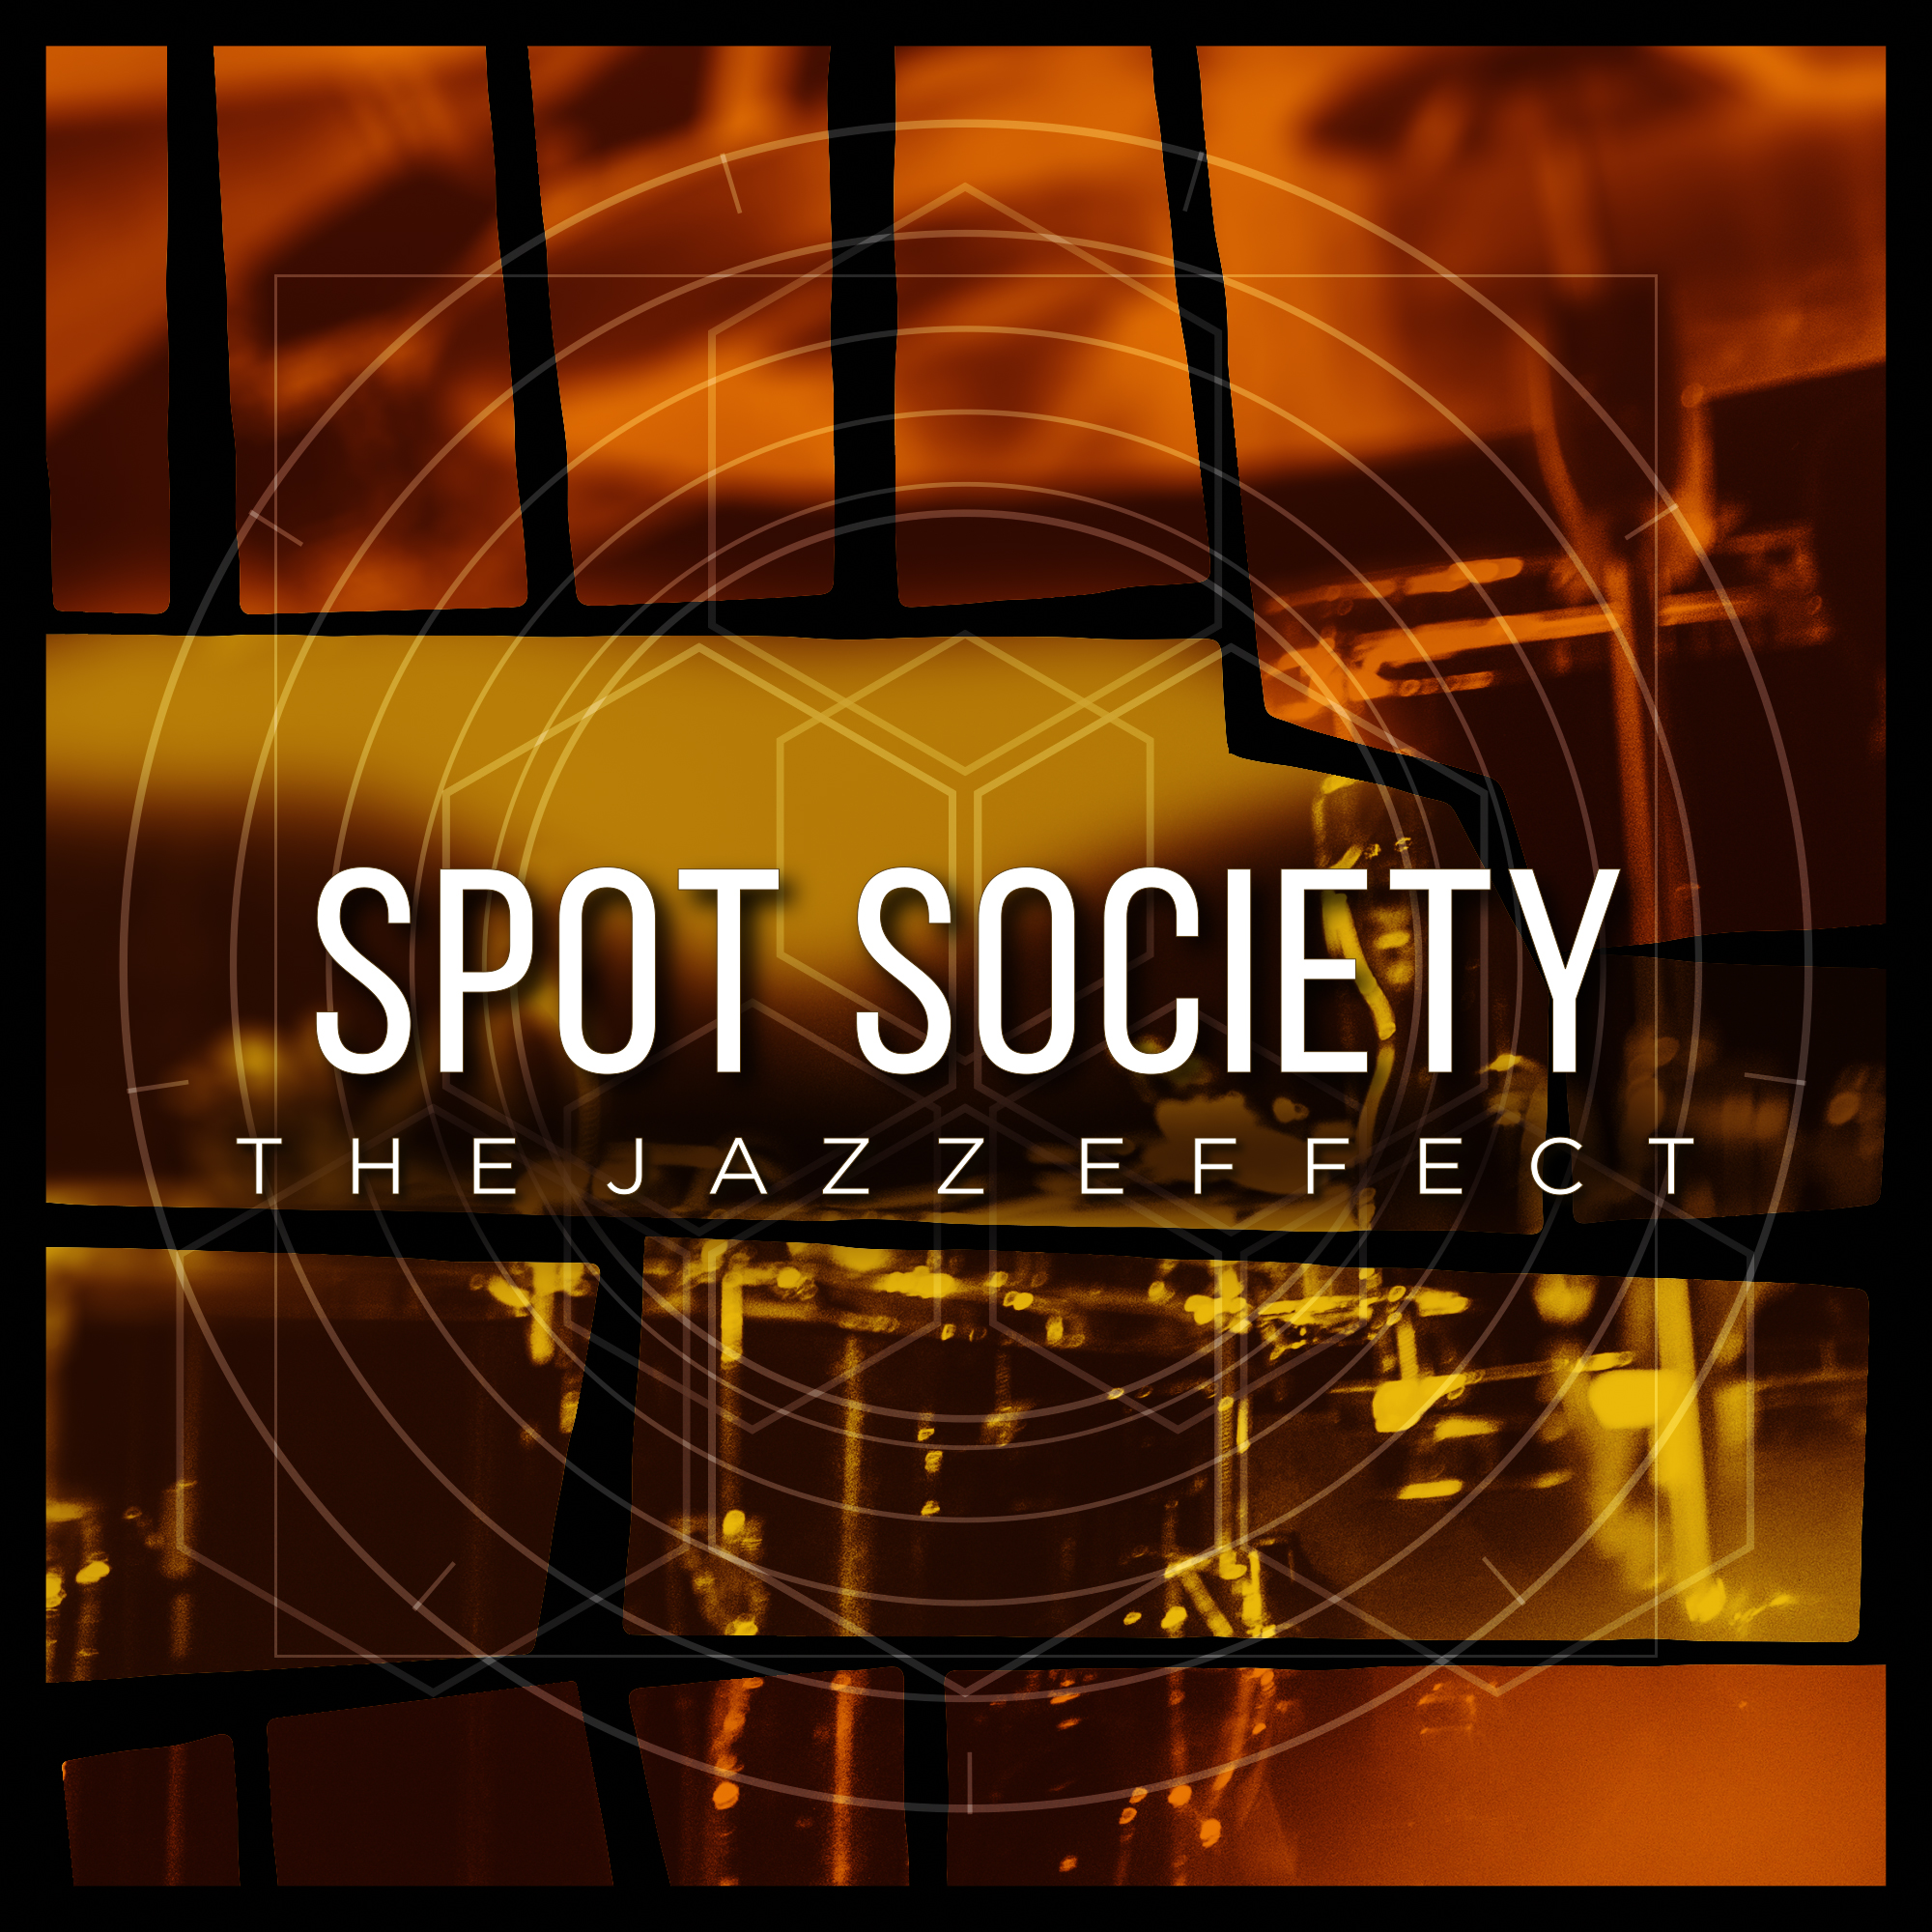 The Jazz Effect